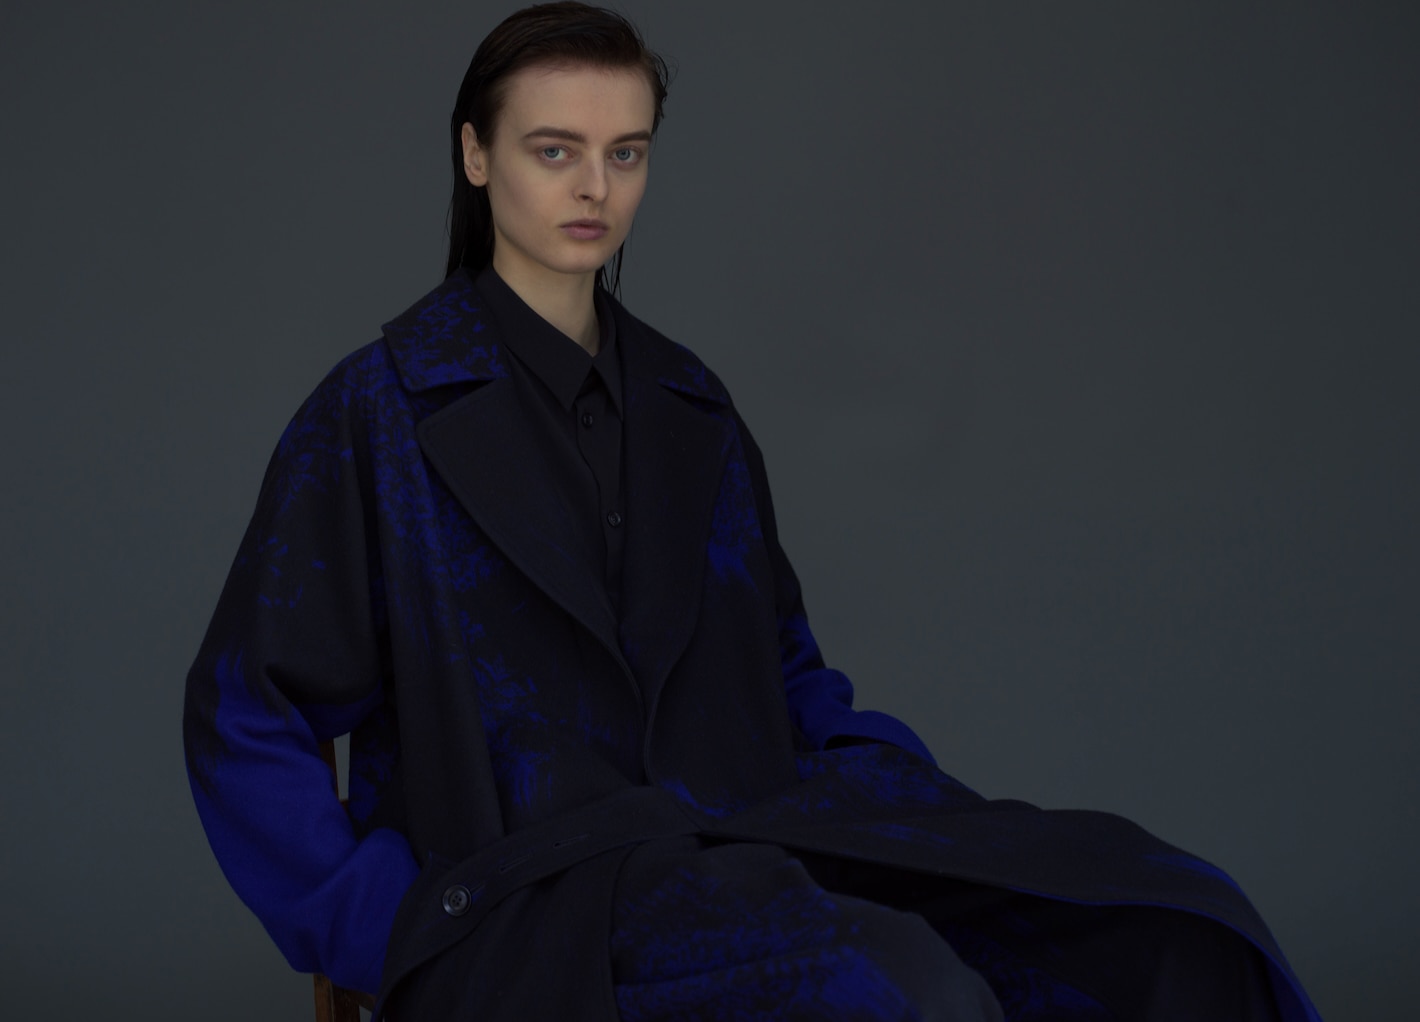 Y’s PRE-FALL 2023 STYLE HIGHLIGHTS